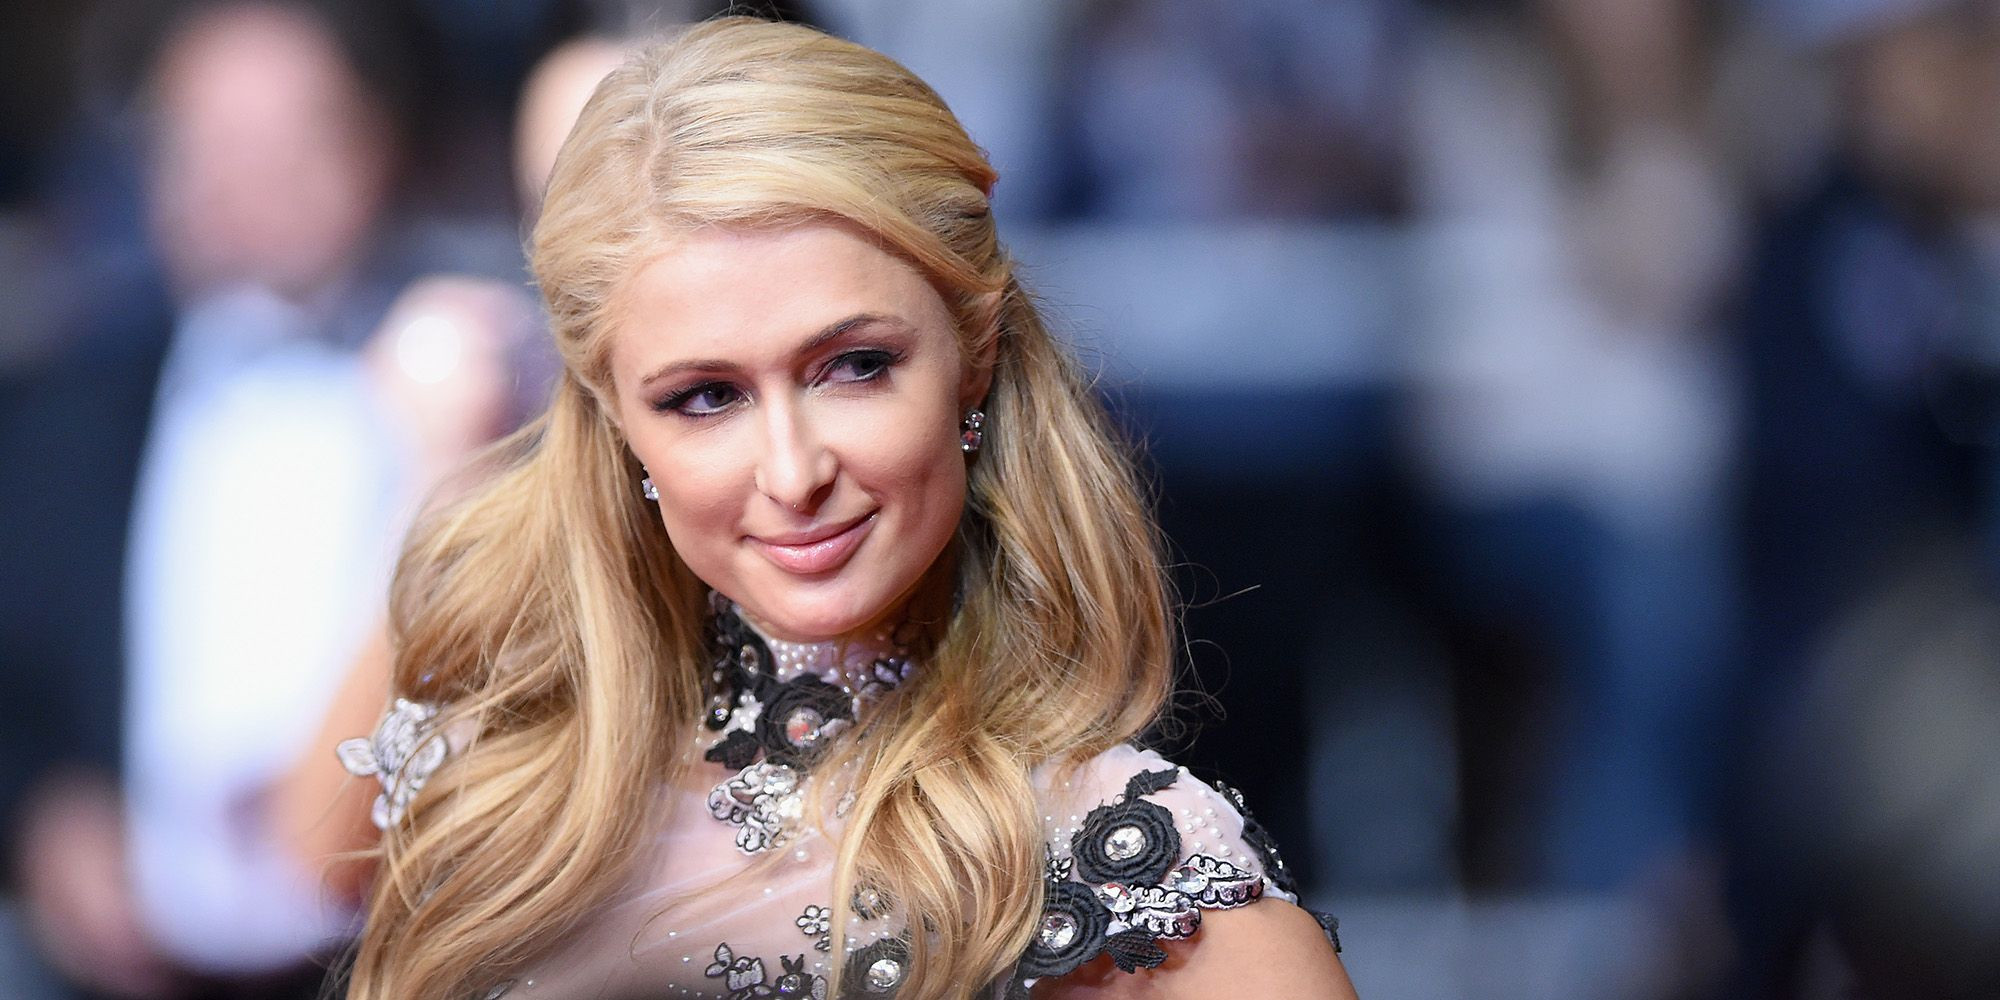 Paris Hilton is far from the only celebrity with a sex tape. Read up on the most notorious tape releases here.